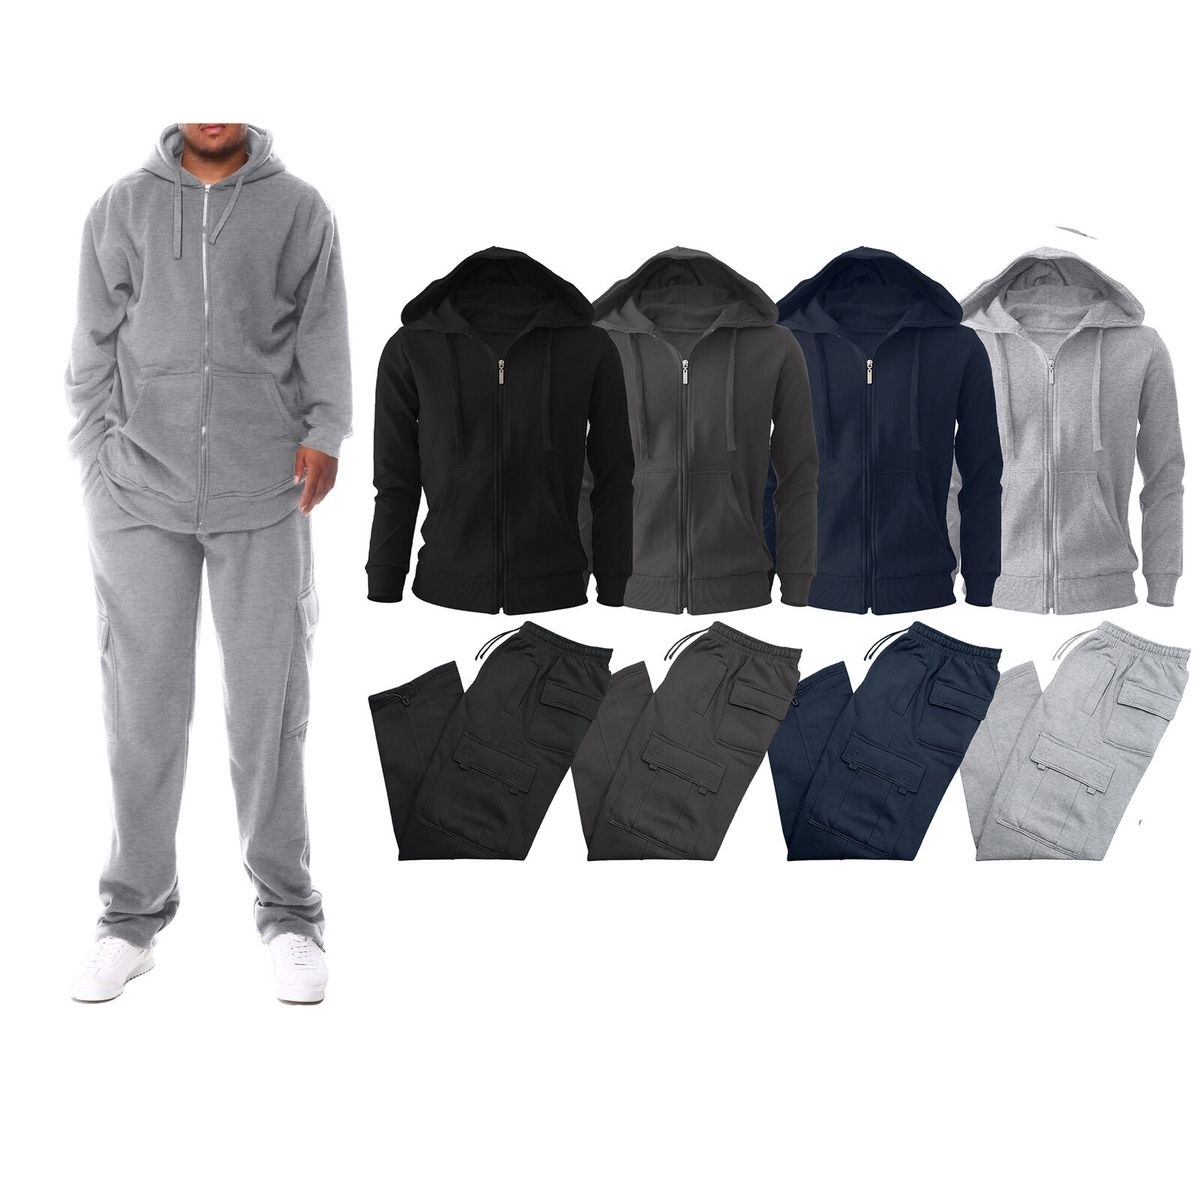 Men's Big & Tall Winter Warm Athletic Active Cozy Fleece Lined Multi-Pocket Full Zip Up Cargo Tracksuit - Charcoal, Small